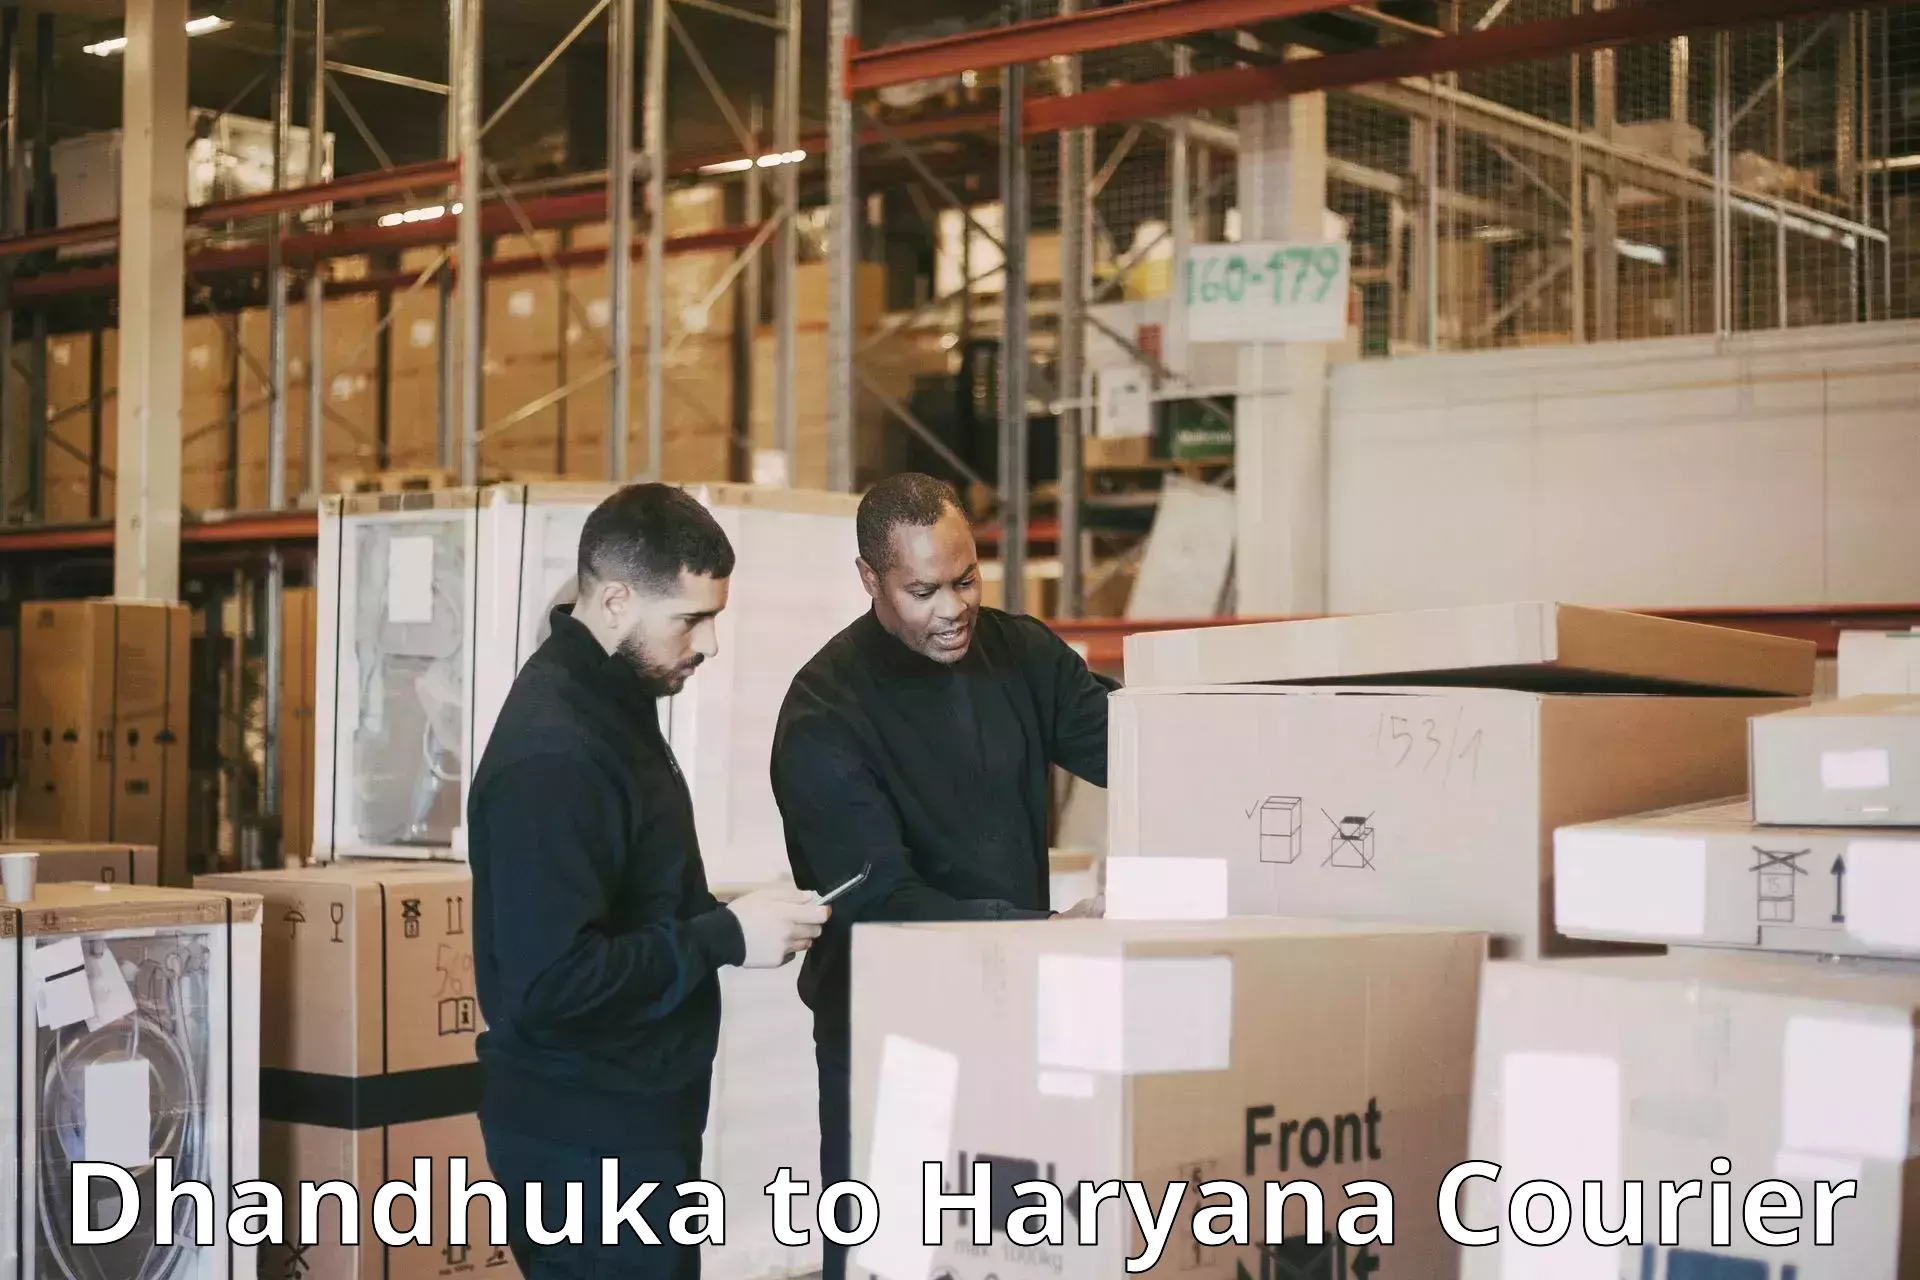 Speedy delivery service Dhandhuka to Sonipat